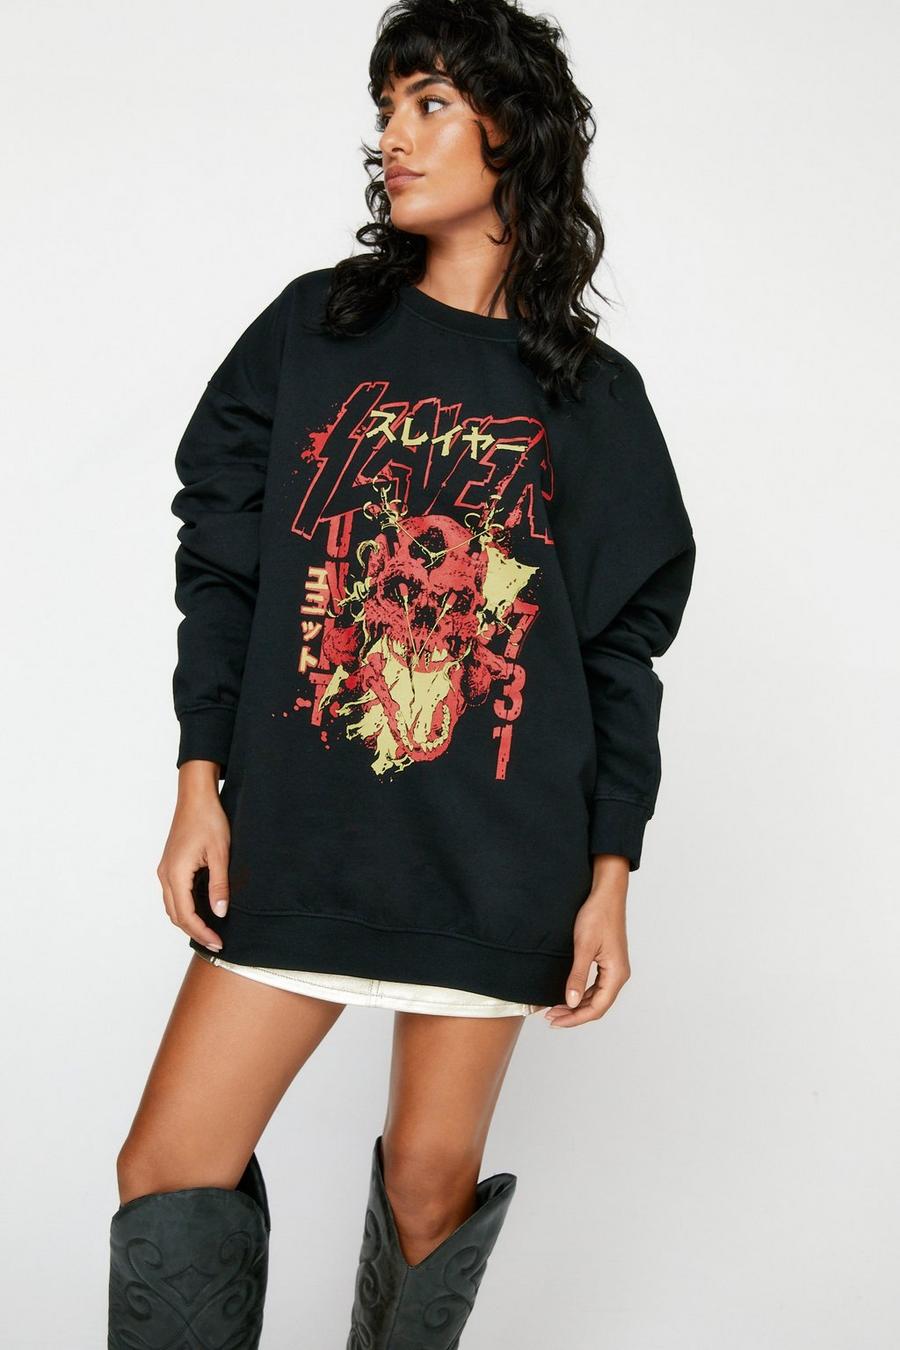 Misfits Graphic Band Long Sleeved Top